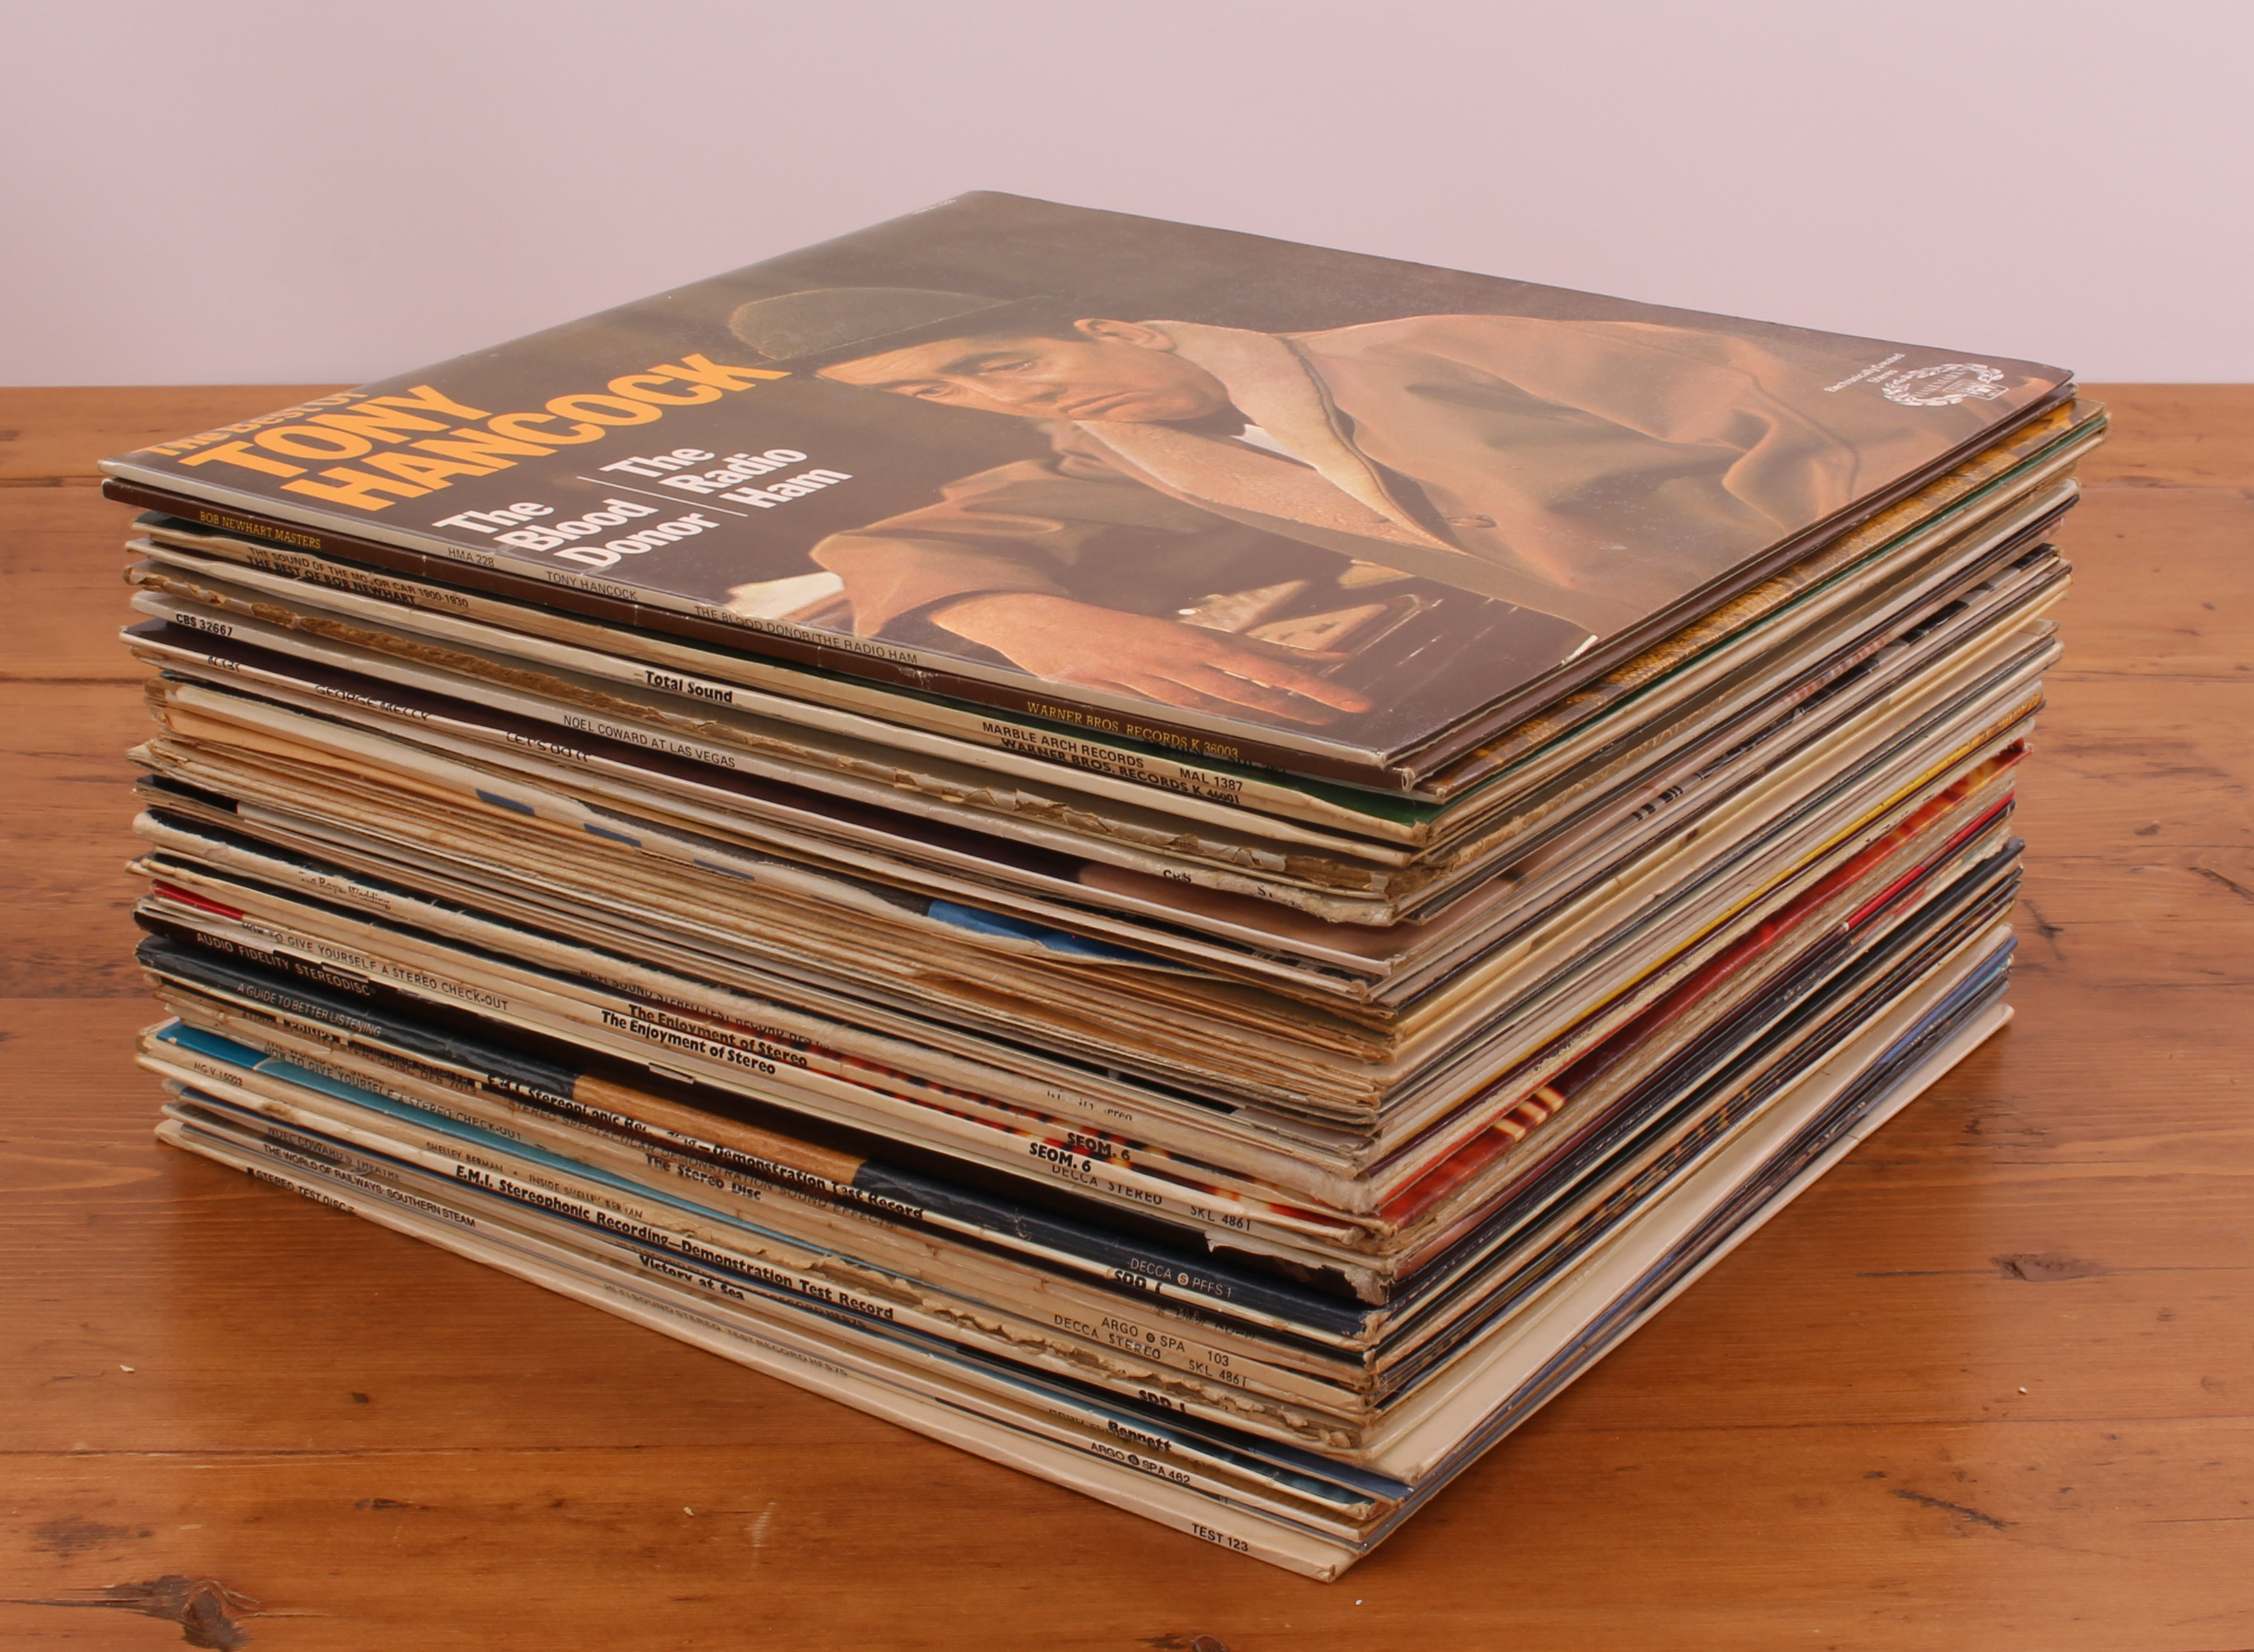 Over 100 spoken word/exotica/stereo test records/comedy albums and box sets. Condition: VG+ - Image 2 of 5